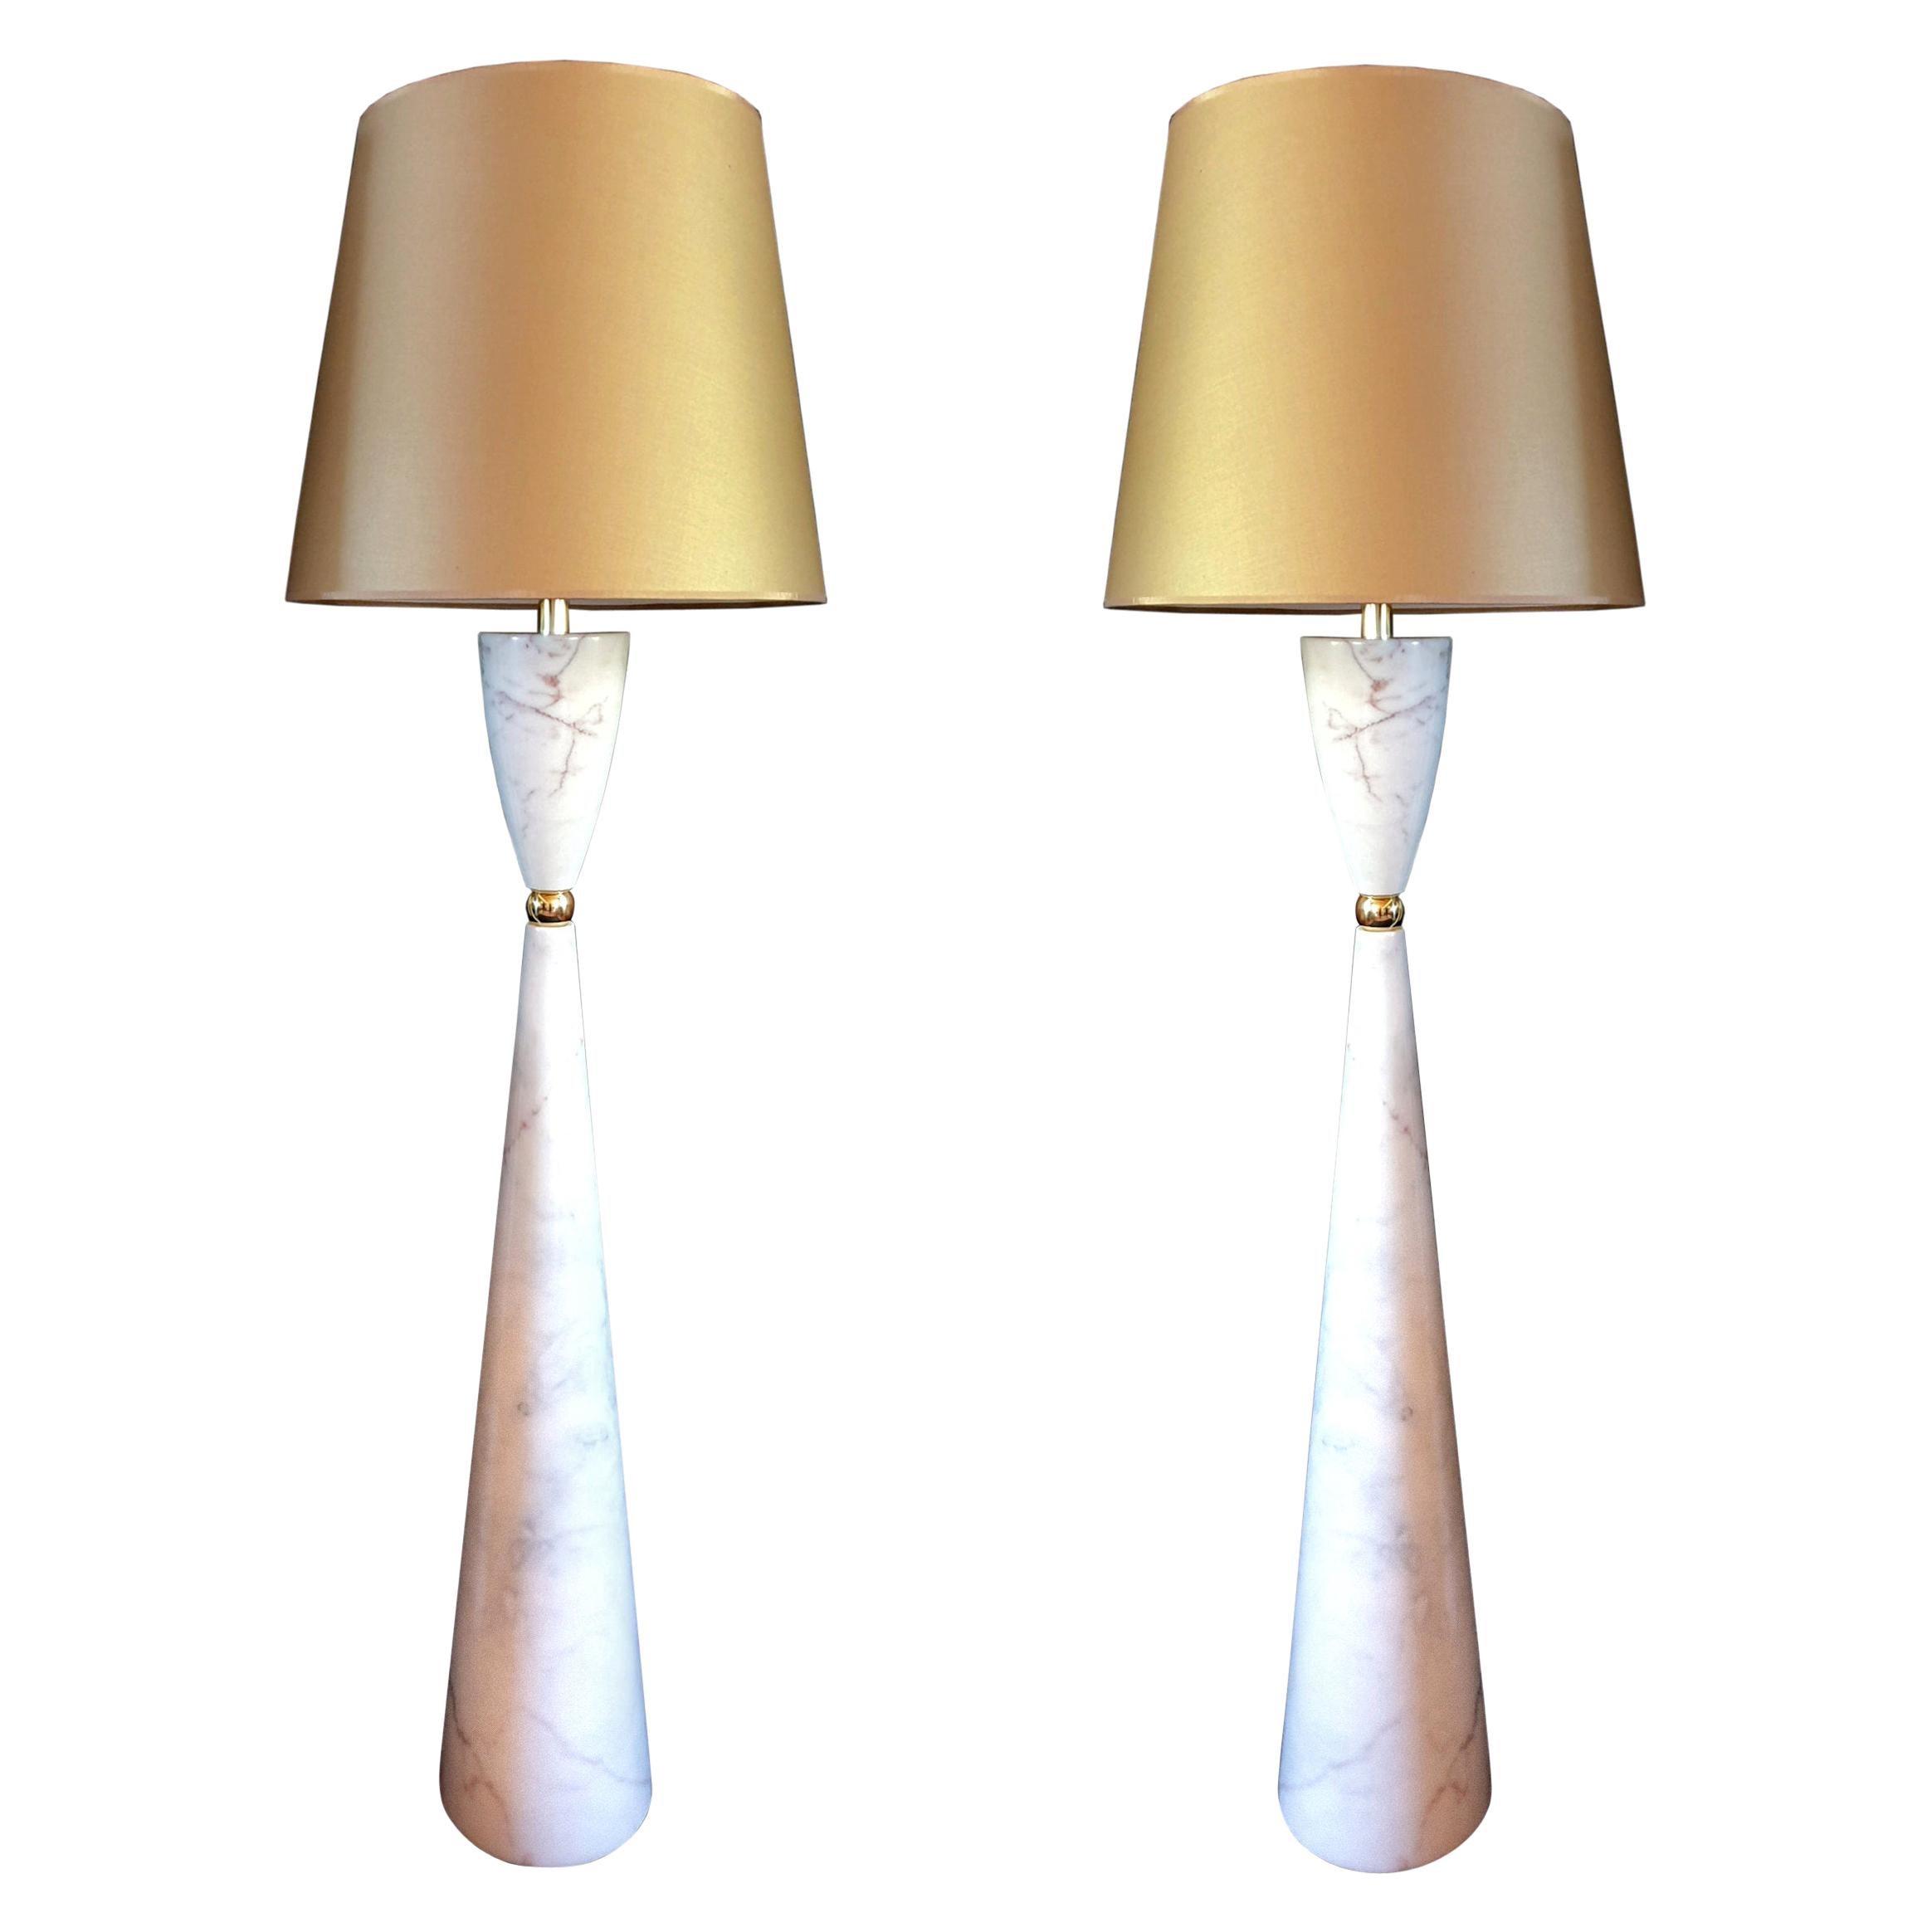 Pair of Large Marble and Brass Mid-Century Modern Floor Lamps, Italy, 1980s